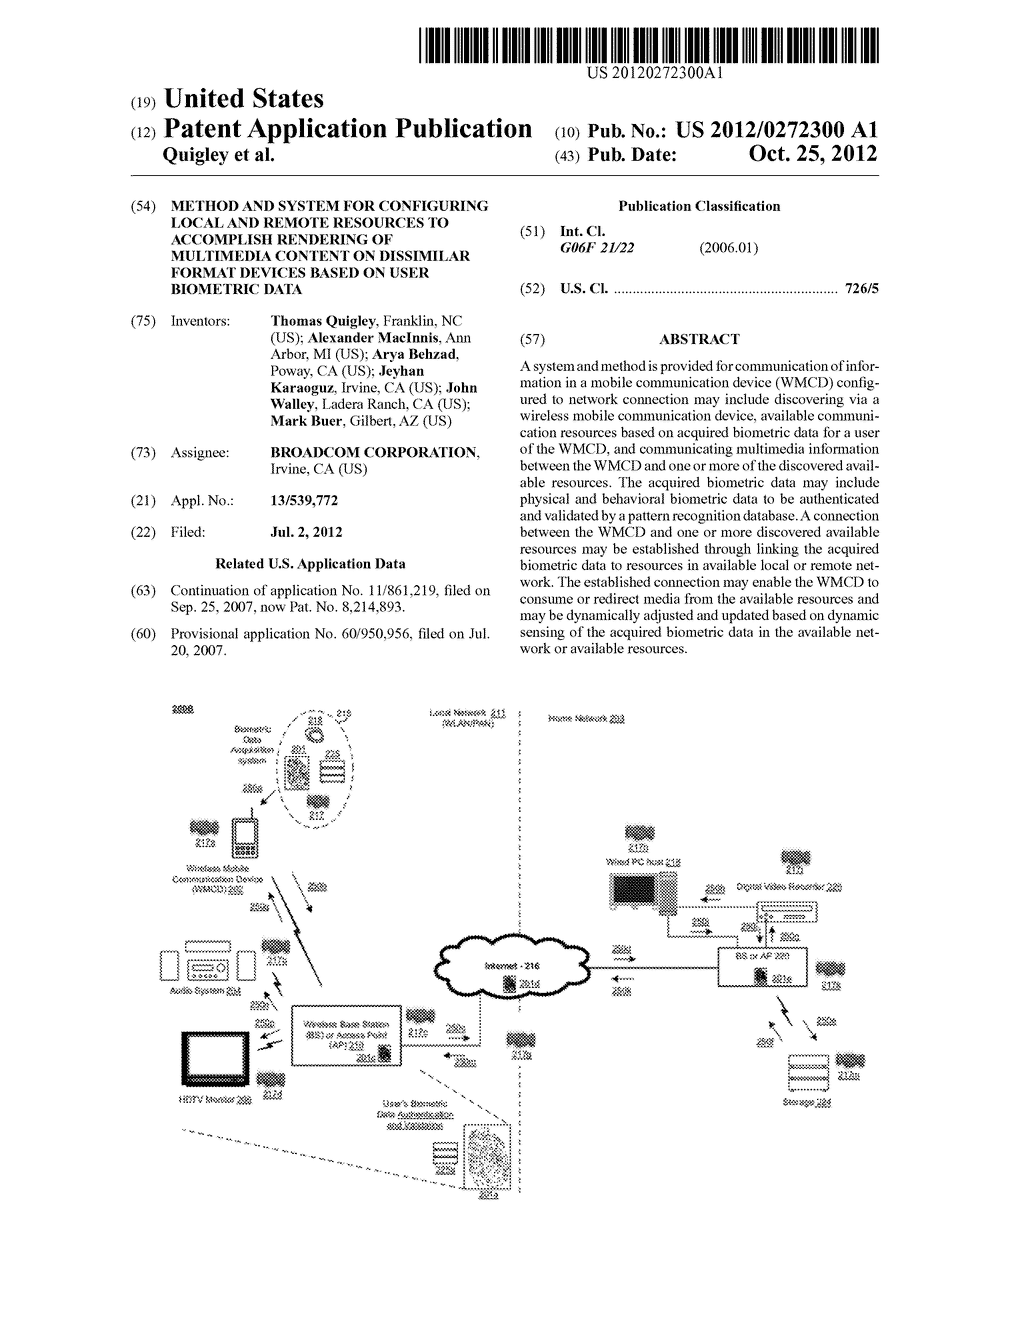 METHOD AND SYSTEM FOR CONFIGURING LOCAL AND REMOTE RESOURCES TO ACCOMPLISH     RENDERING OF MULTIMEDIA CONTENT ON DISSIMILAR FORMAT DEVICES BASED ON     USER BIOMETRIC DATA - diagram, schematic, and image 01